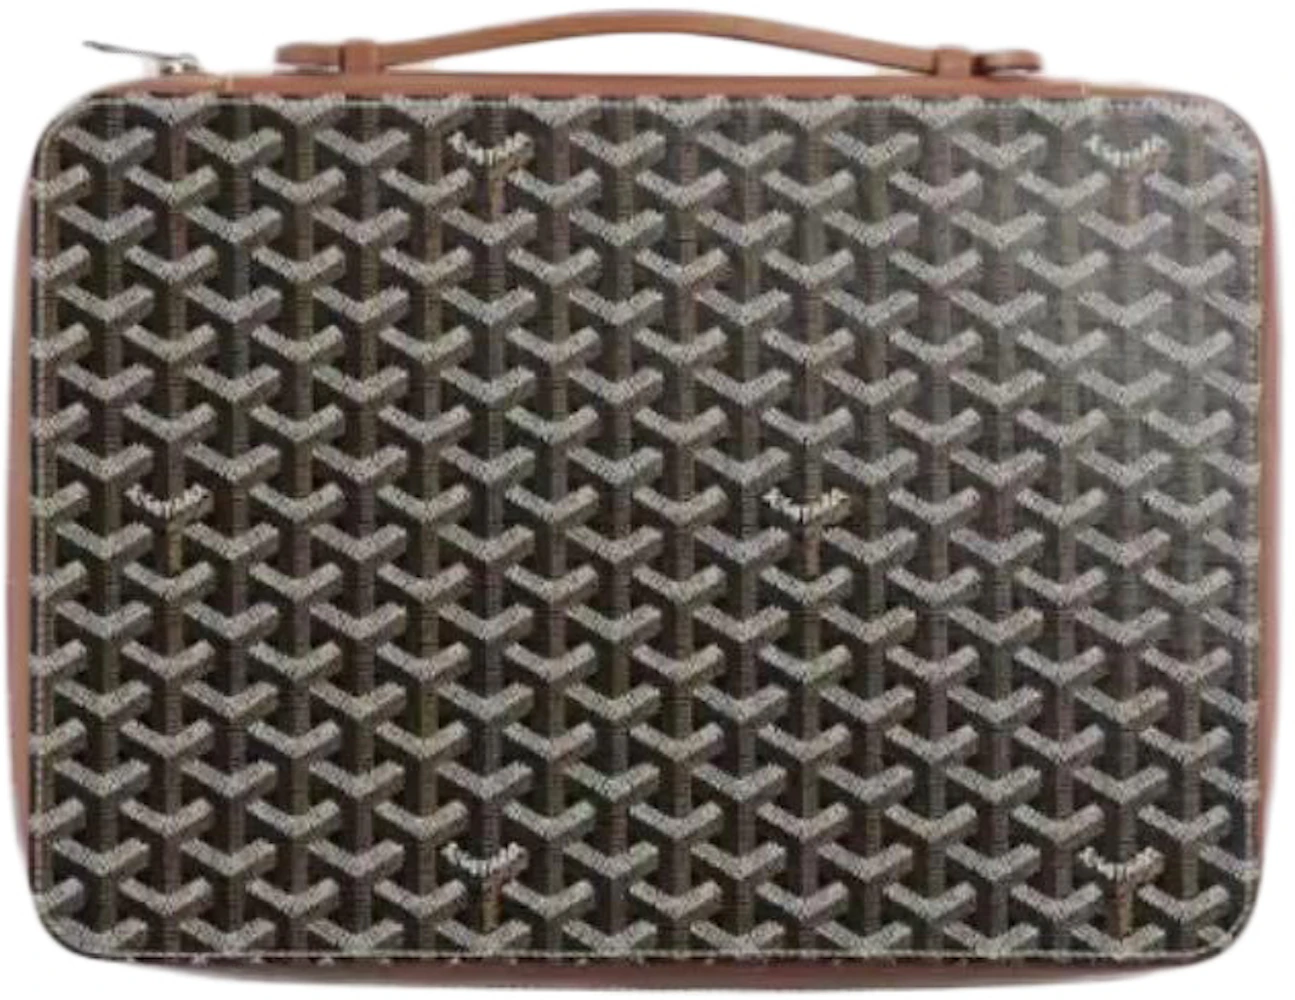 At Goyard and Valextra, Leather Goods That Are Durable, Versatile